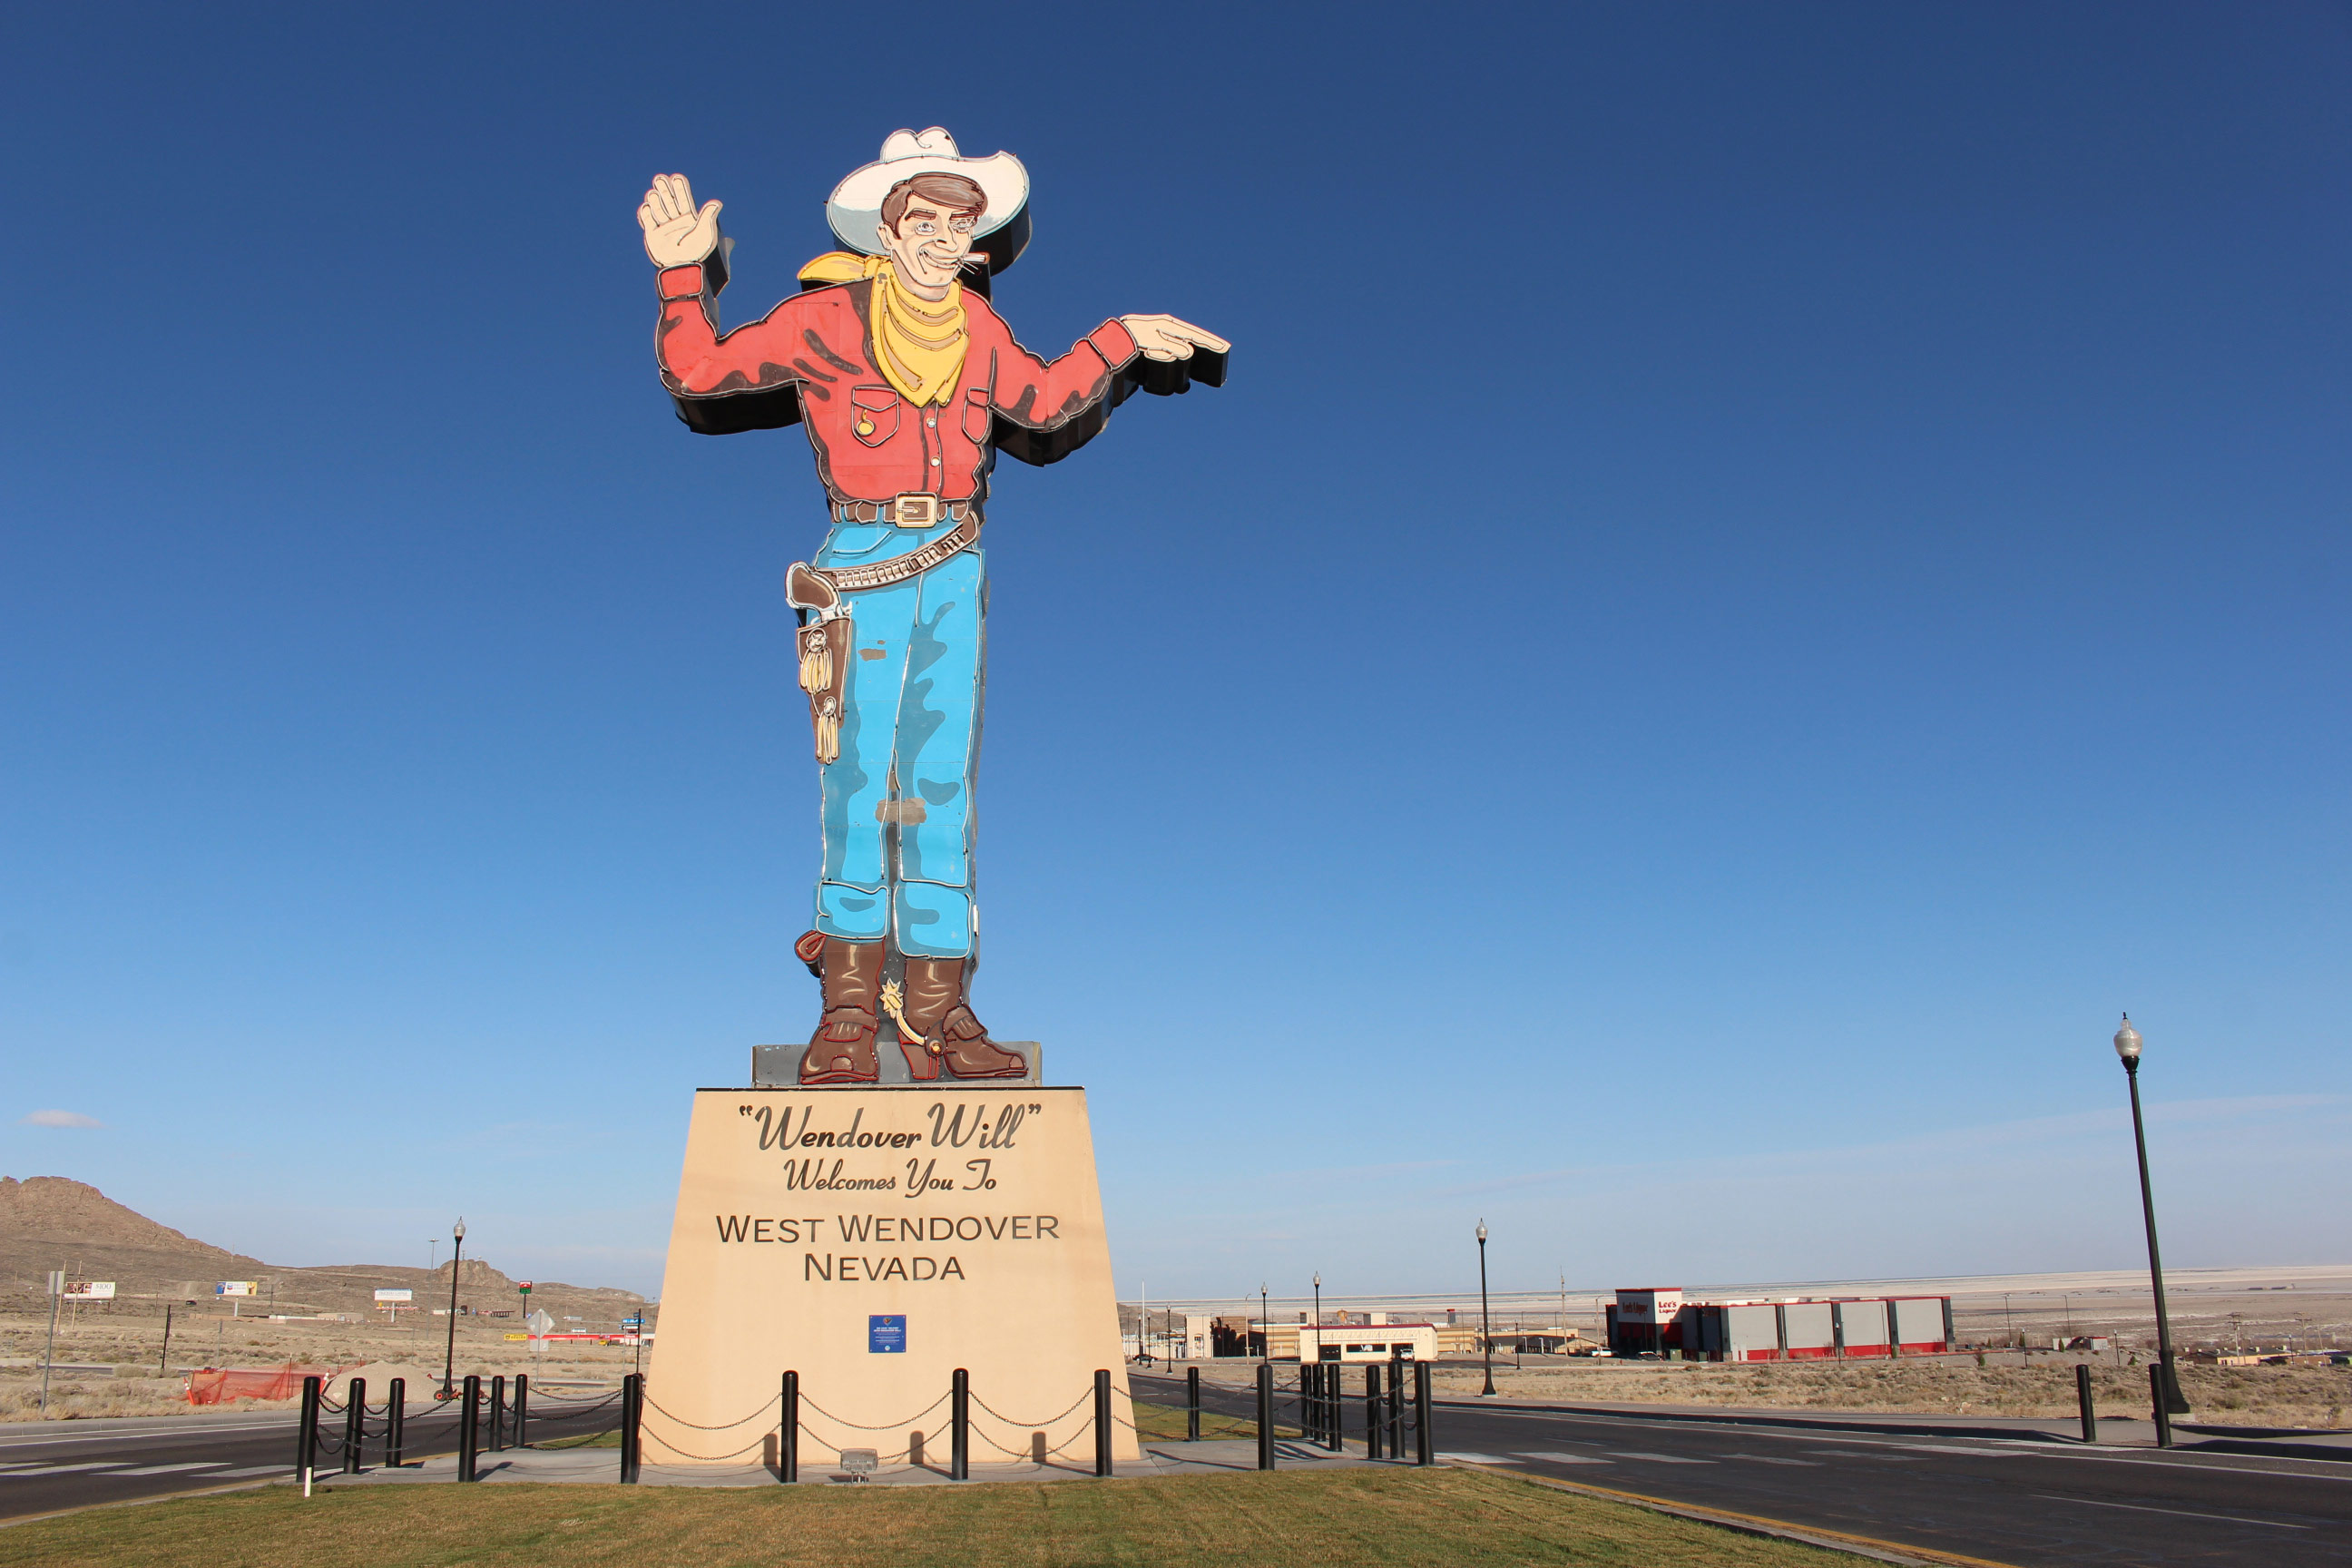 A photo of a large visitor sign depicting a cowboy with text that reads, "Wendover Will welcomes you to West Wendover, Nevada."